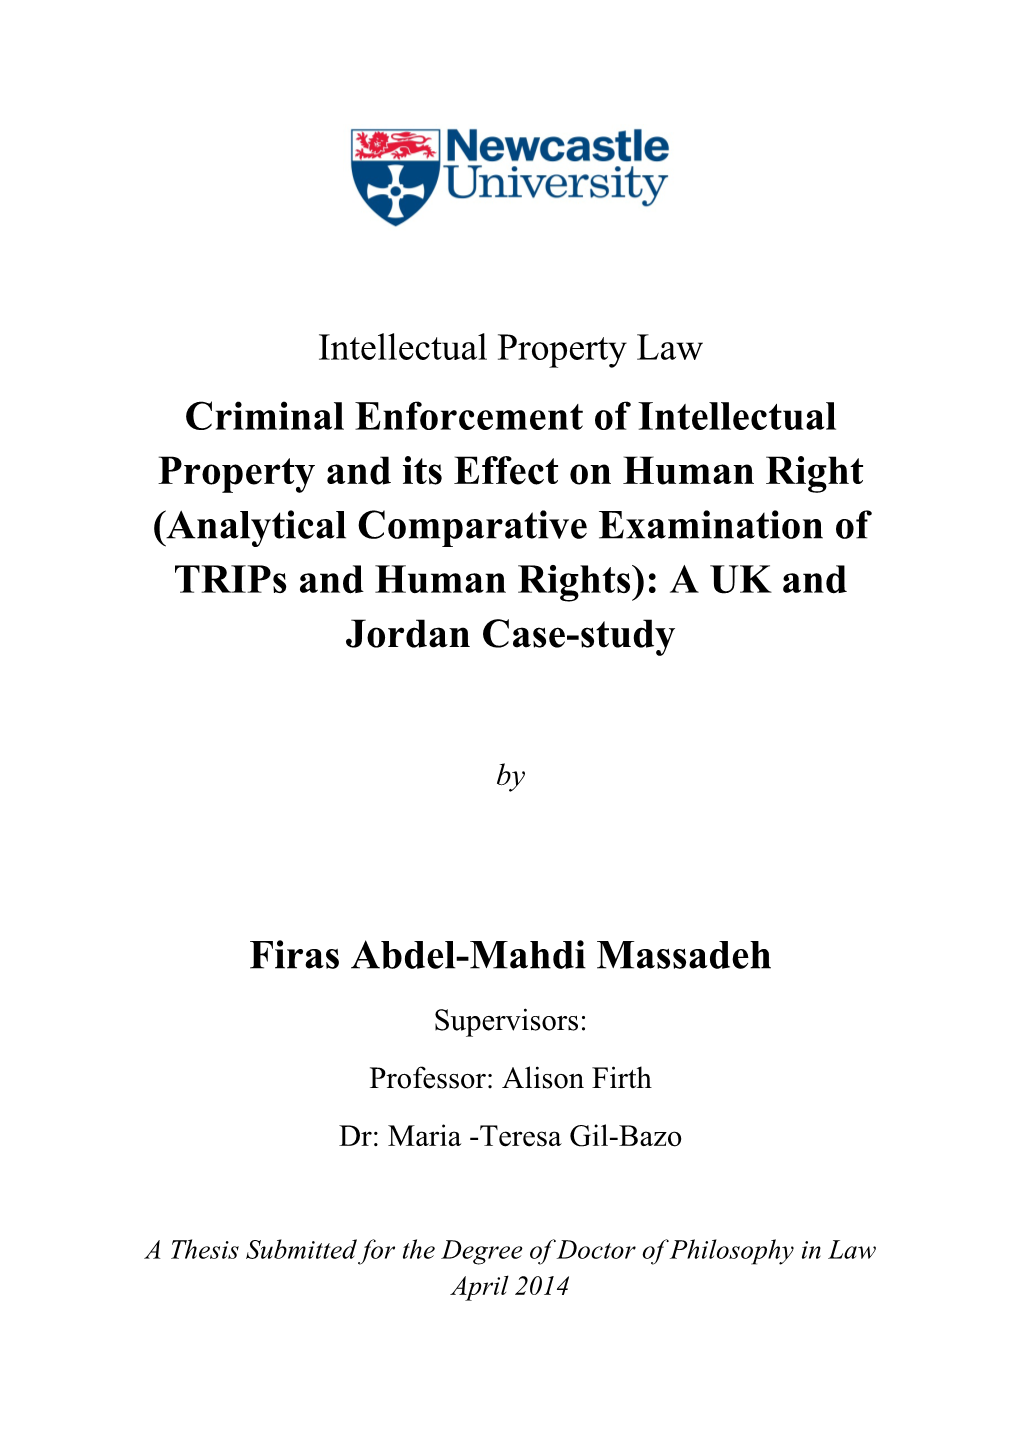 Criminal Enforcement of Intellectual Property and Its Effect on Human